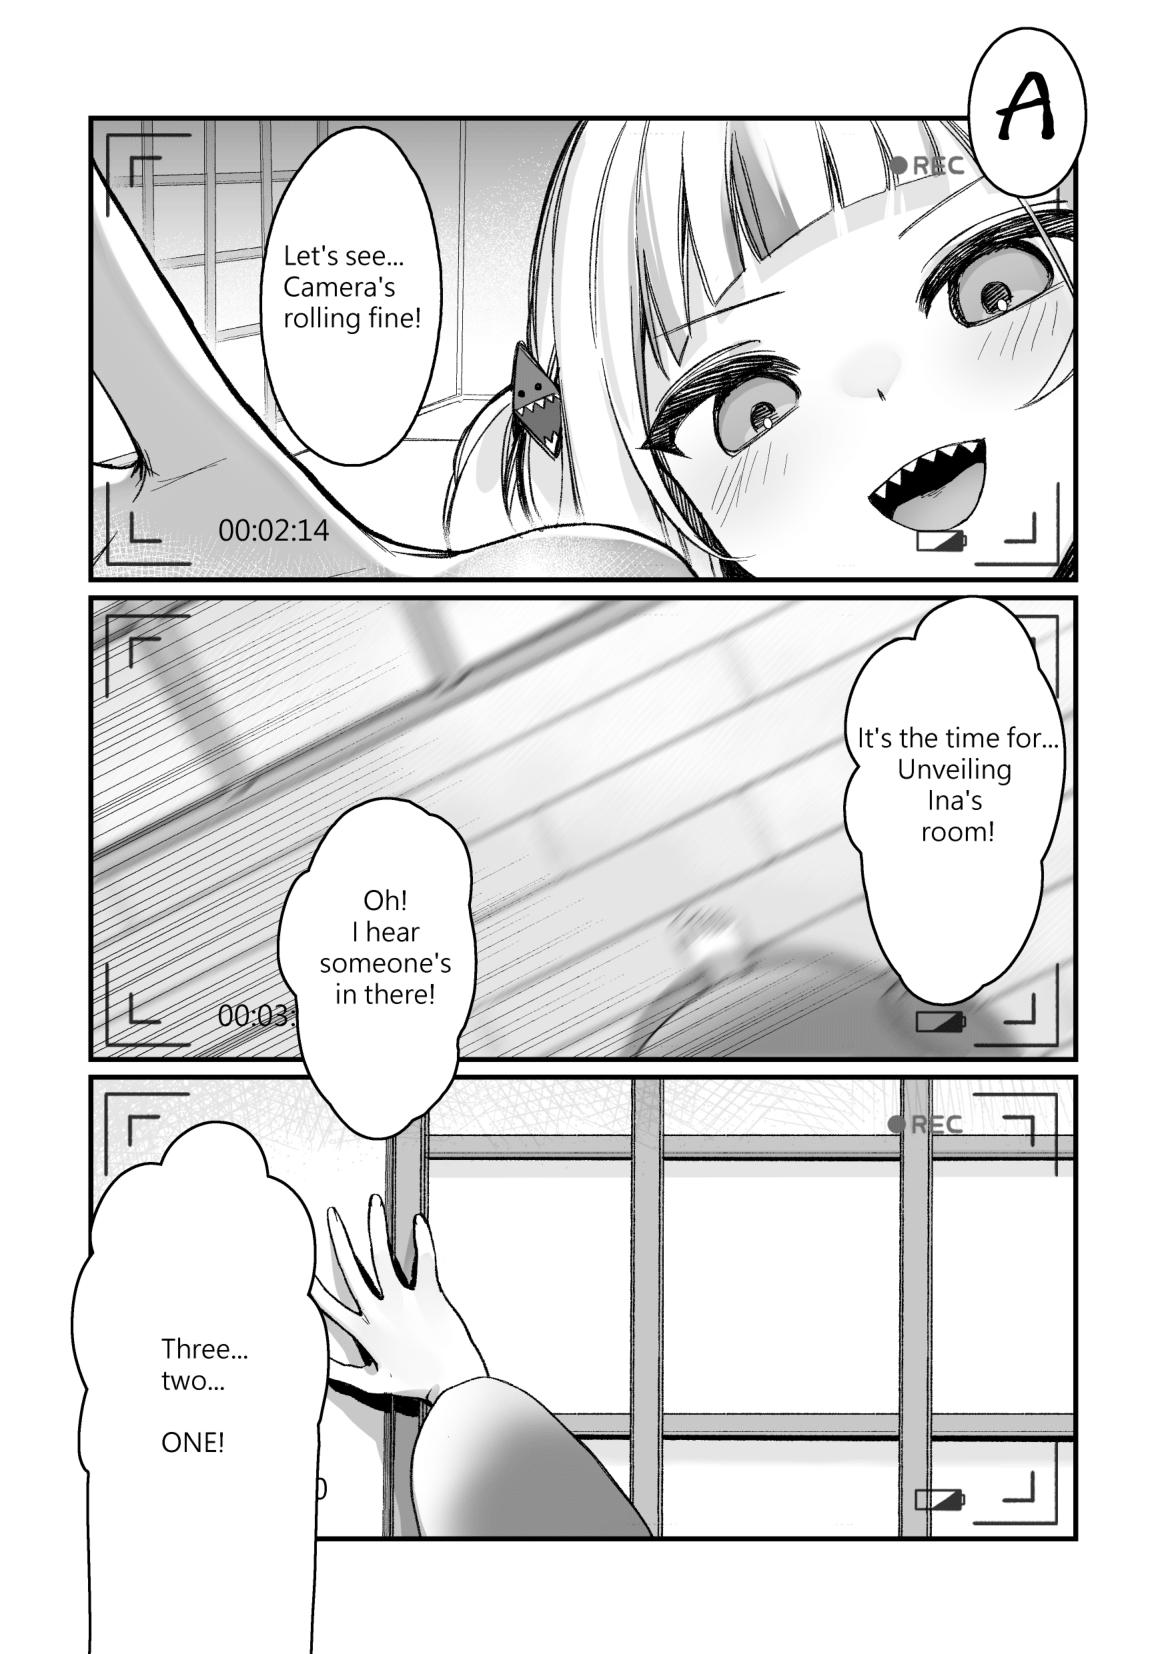 Nude 【R-18 Comic】Tentacle!! Ina's Boing Boing is out of control!! - Hololive Transvestite - Page 3